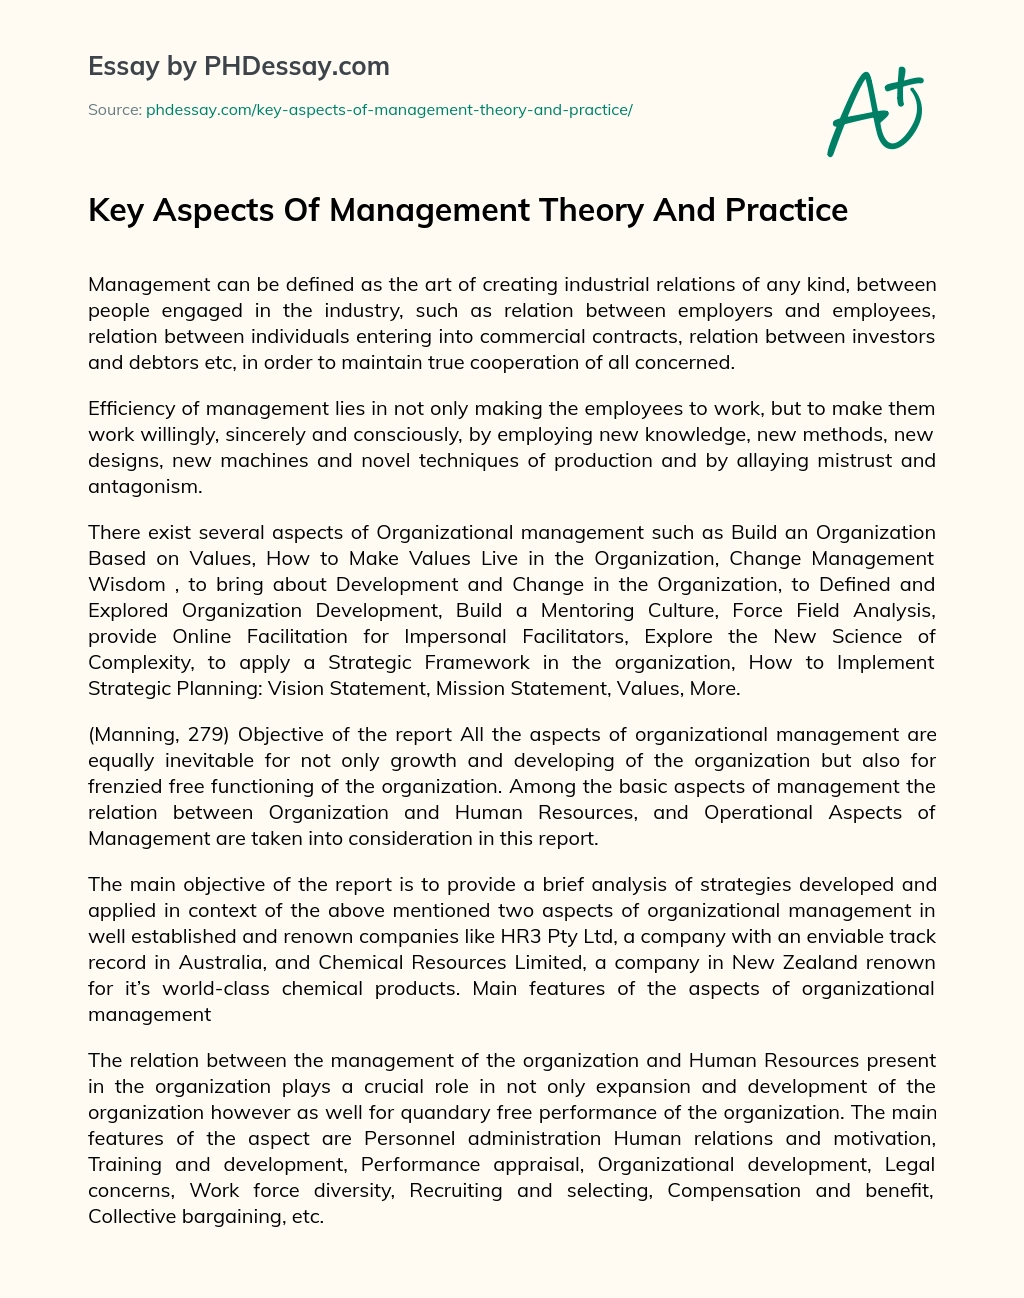 Key Aspects Of Management Theory And Practice essay